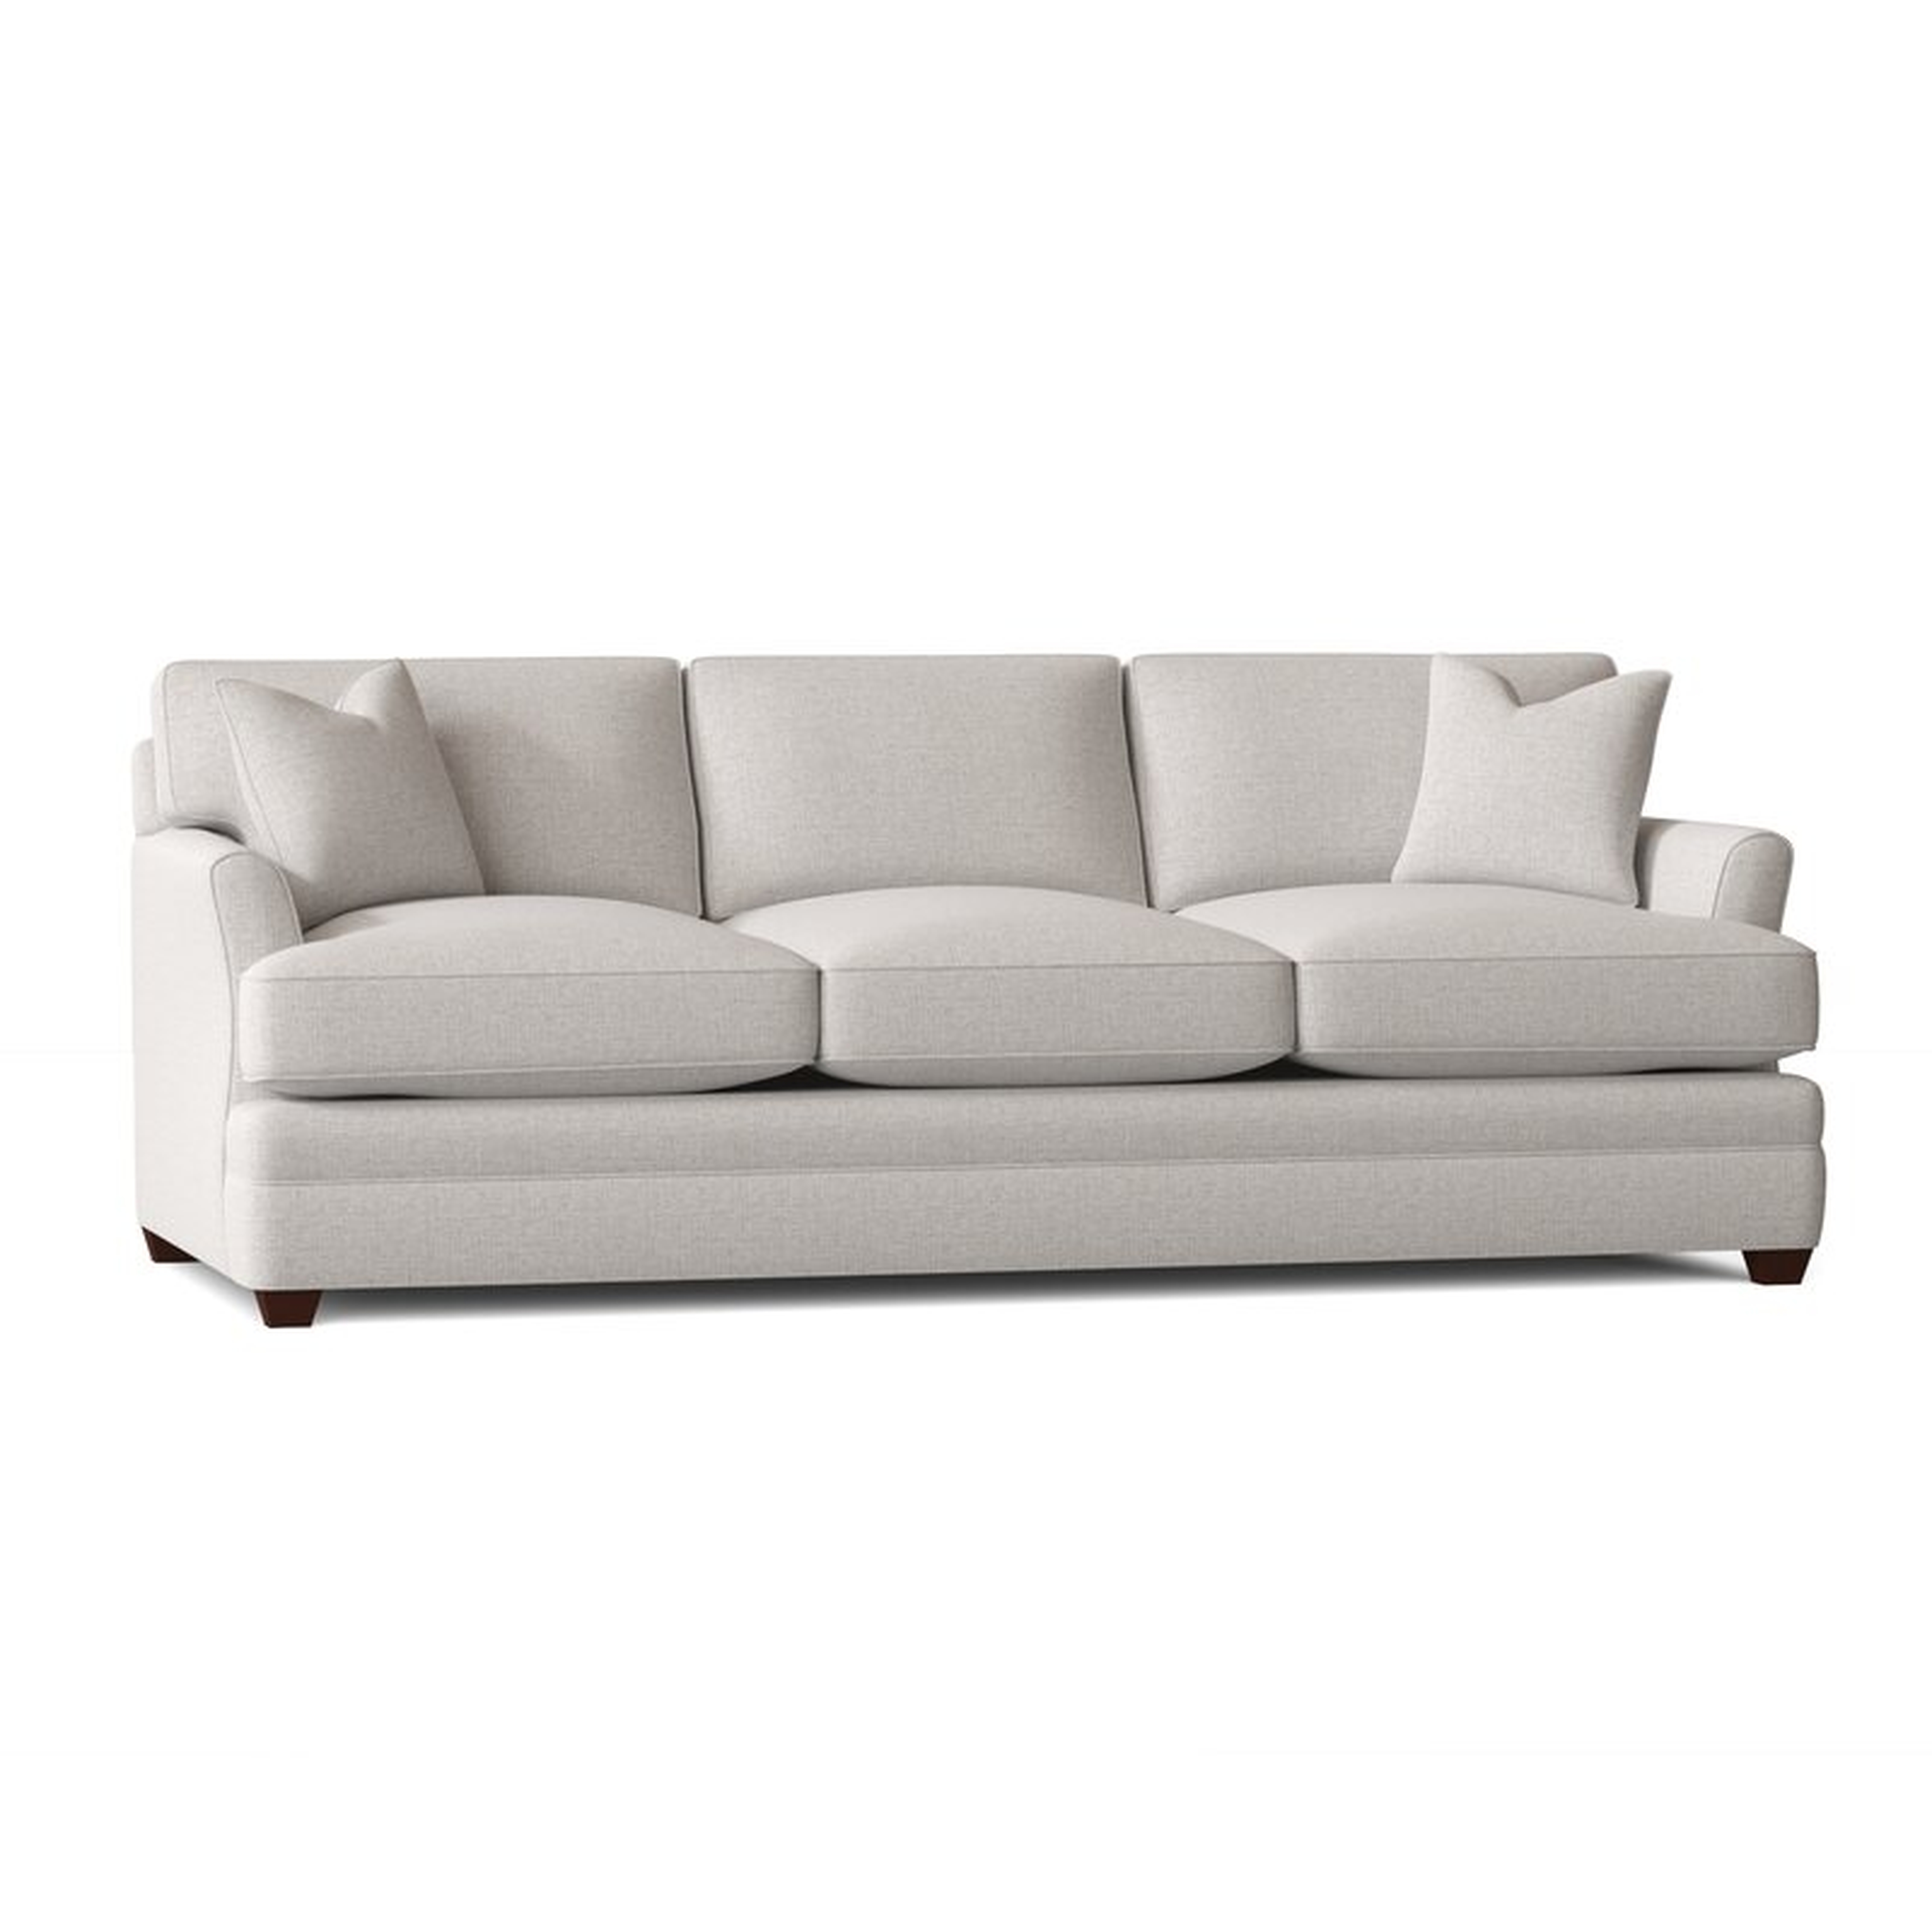 91" Square Arm Sofa Bed with Reversible Cushions - Wayfair